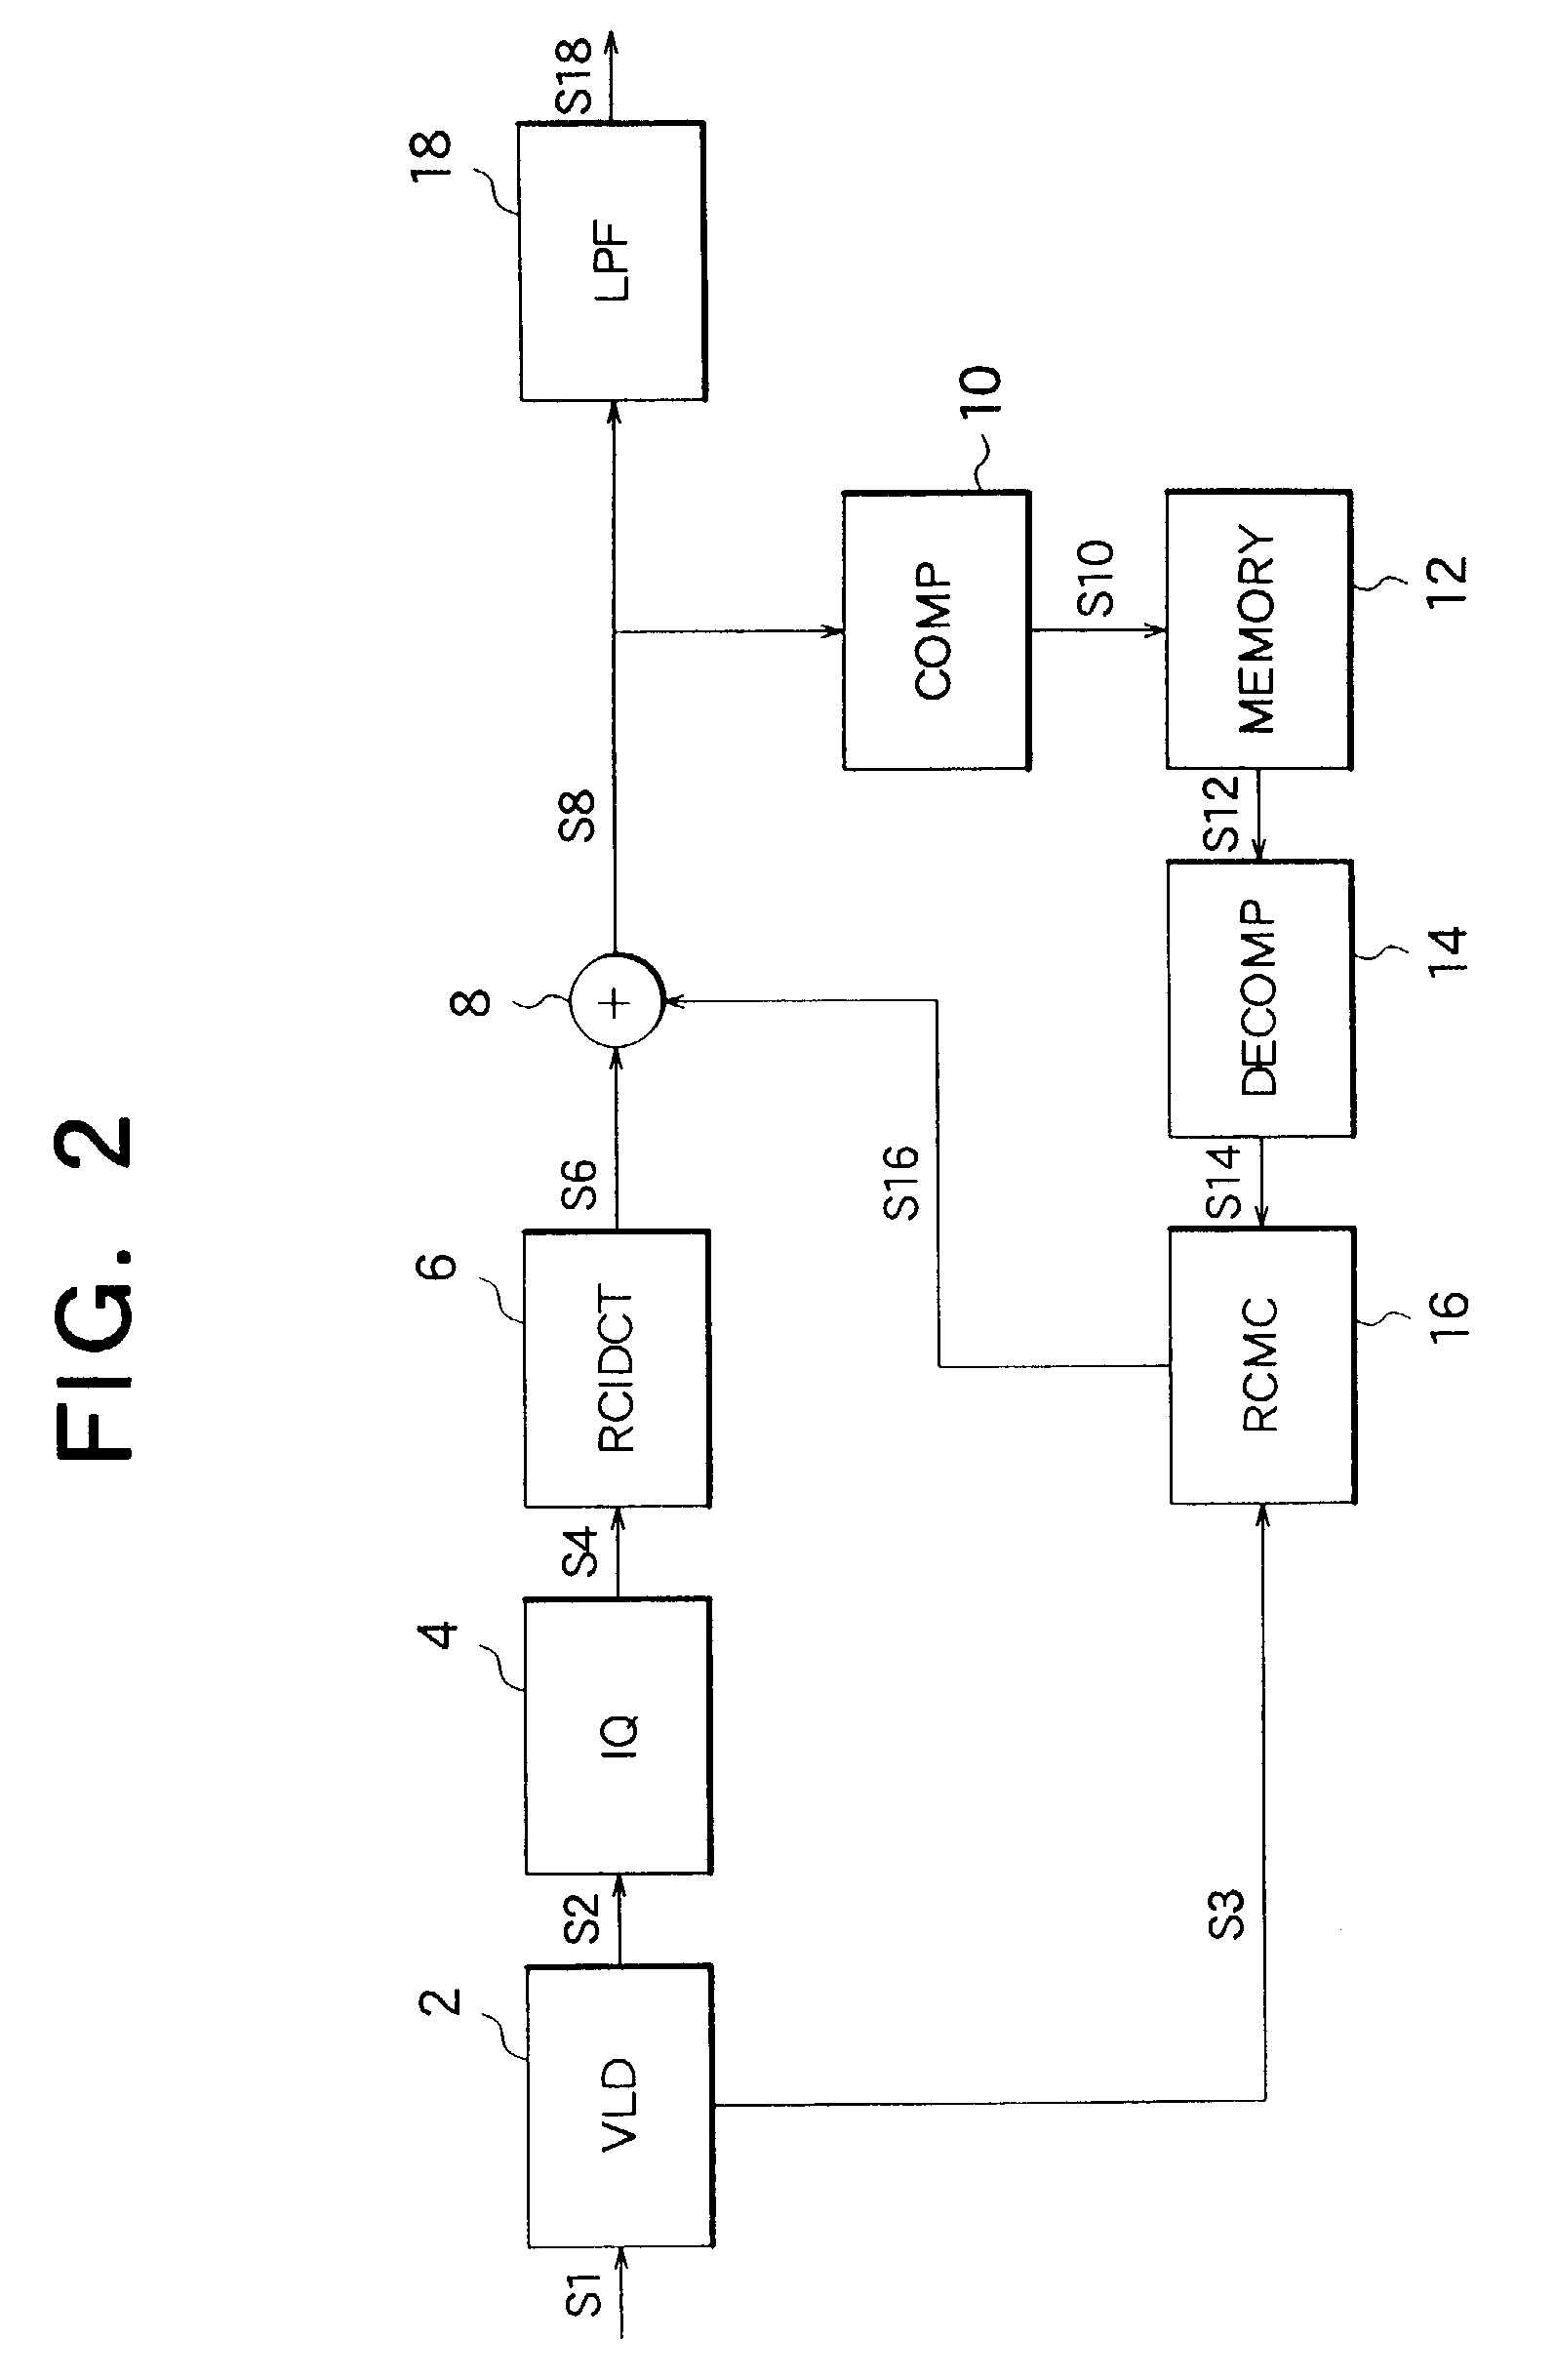 Moving-picture coding and decoding method and apparatus with reduced computational cost